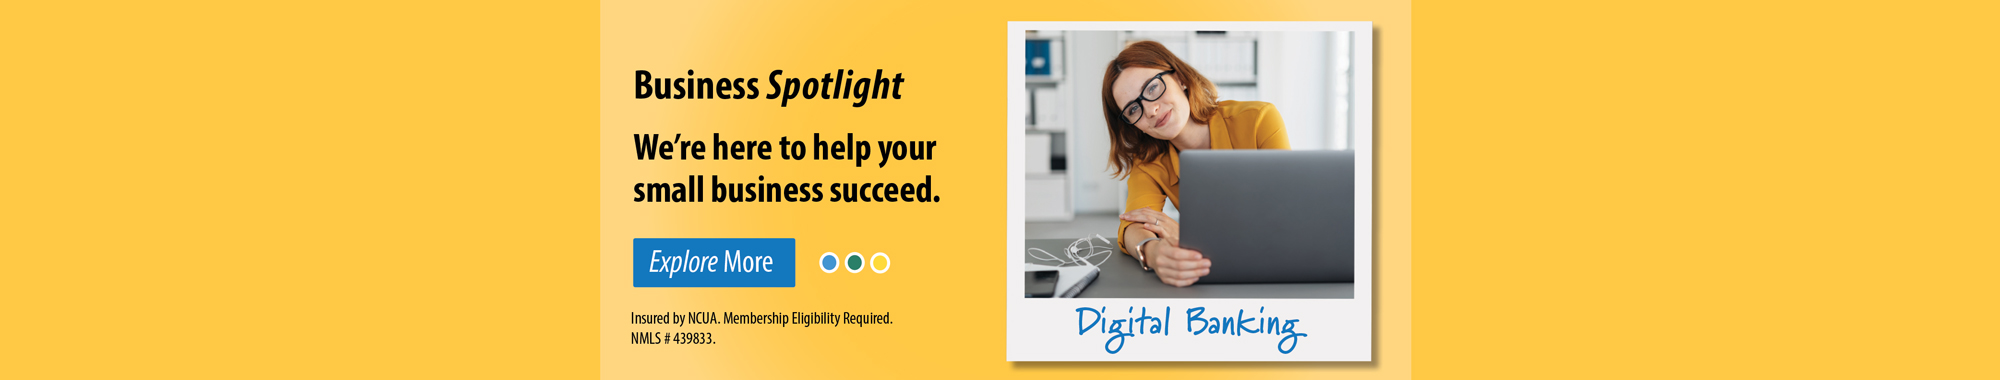 Business Spotlight. We're here to help your small business succeed. Explore more.